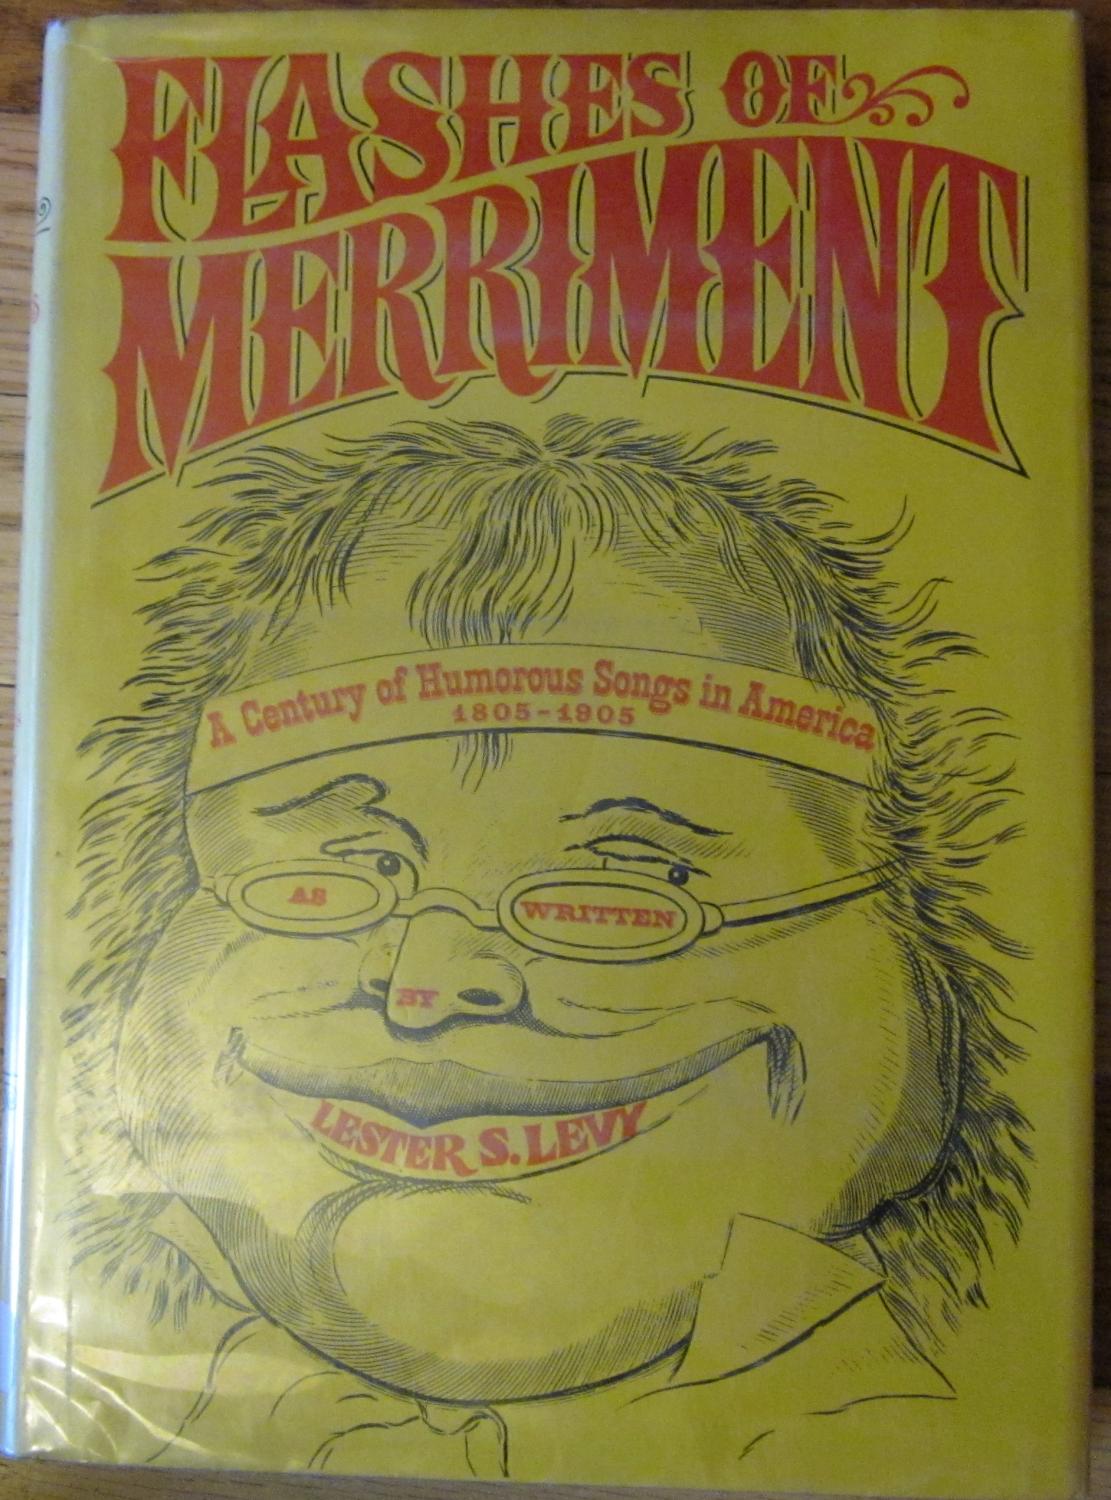 Flashes of Merriment by Lester S. Levy: Very Good Hardcover (1971) First  Edition. | Wordbank Books